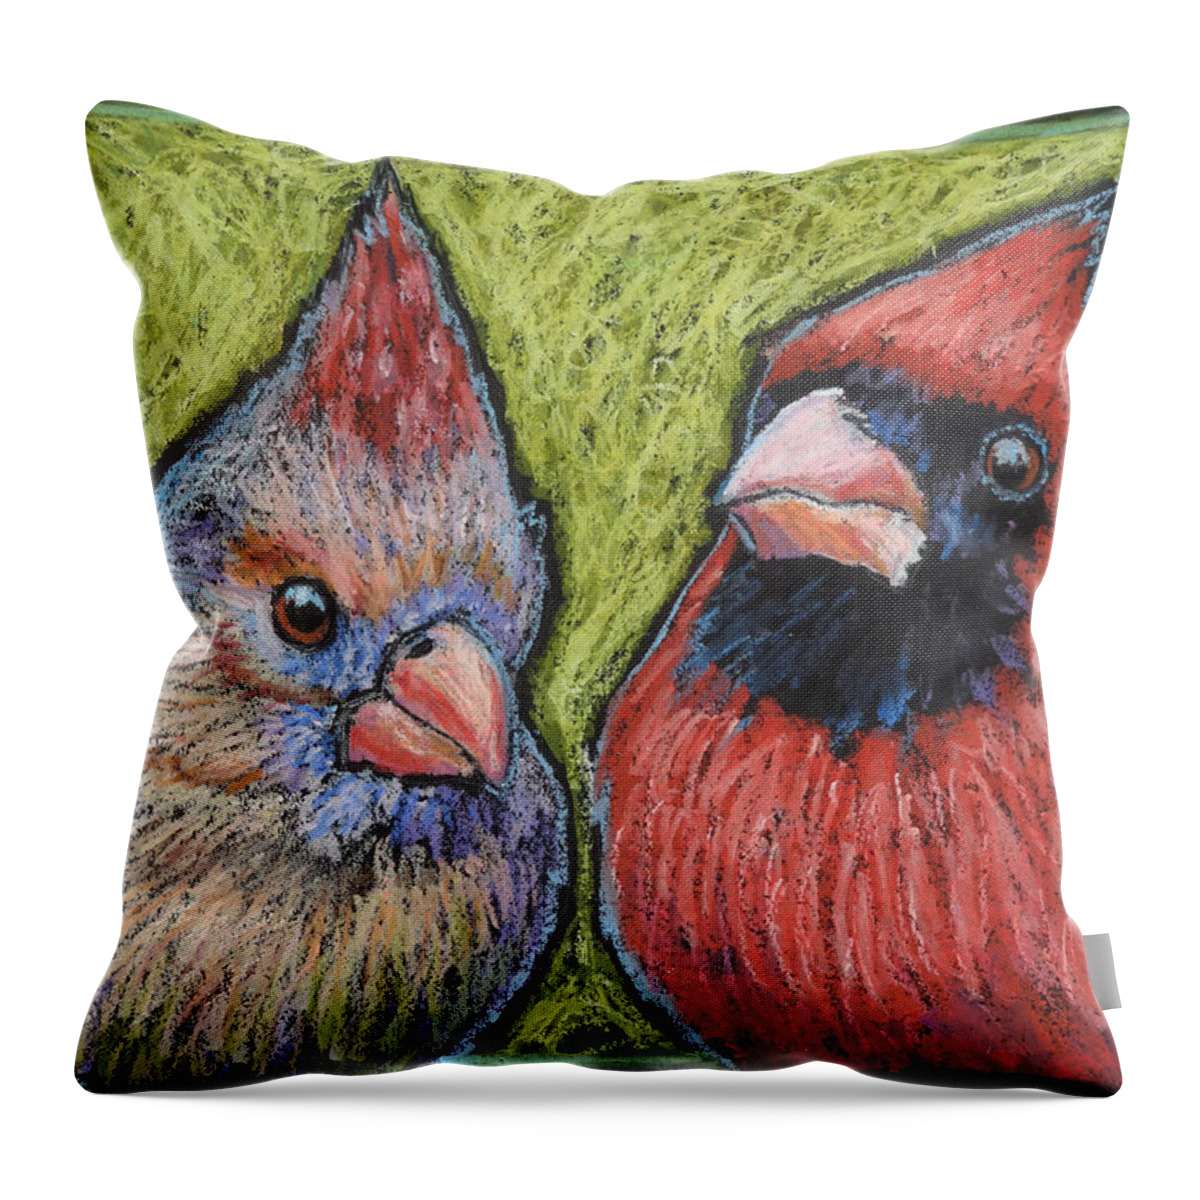 Cardinals Throw Pillow featuring the painting Cardinal Mugs by Ande Hall